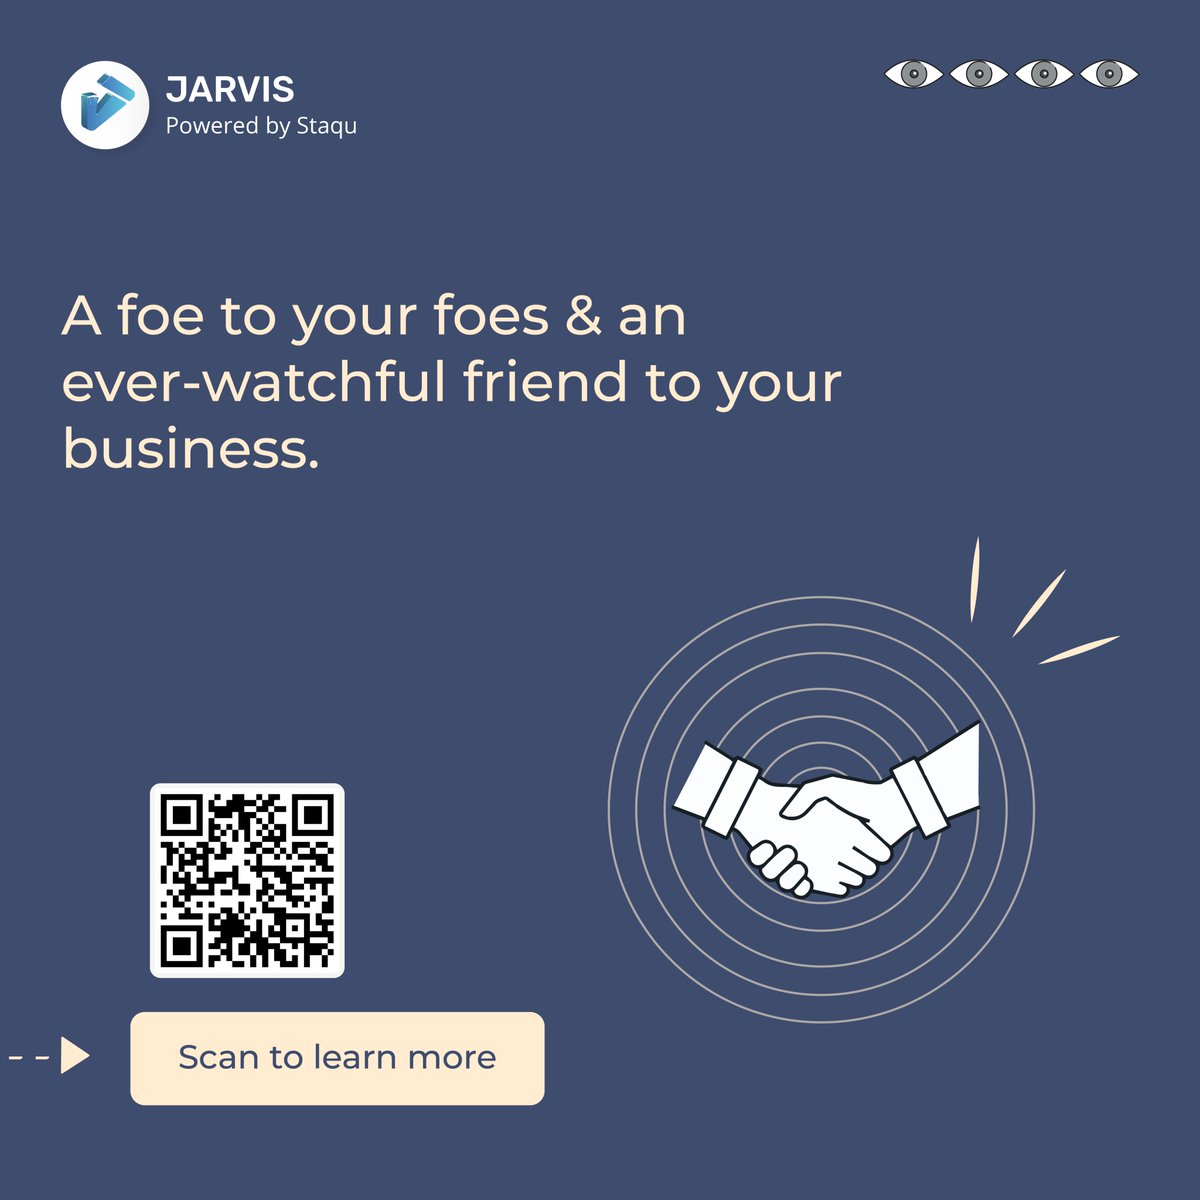 Turn your cameras into your sentinel squads. With JARVIS' video analytics for intrusion detection, secure your business against all manner of threats.

Click on the link for more details: 
 lnkd.in/d-DzPqNx

#Jarvis #videoanalytics #intrusiondetection #safety